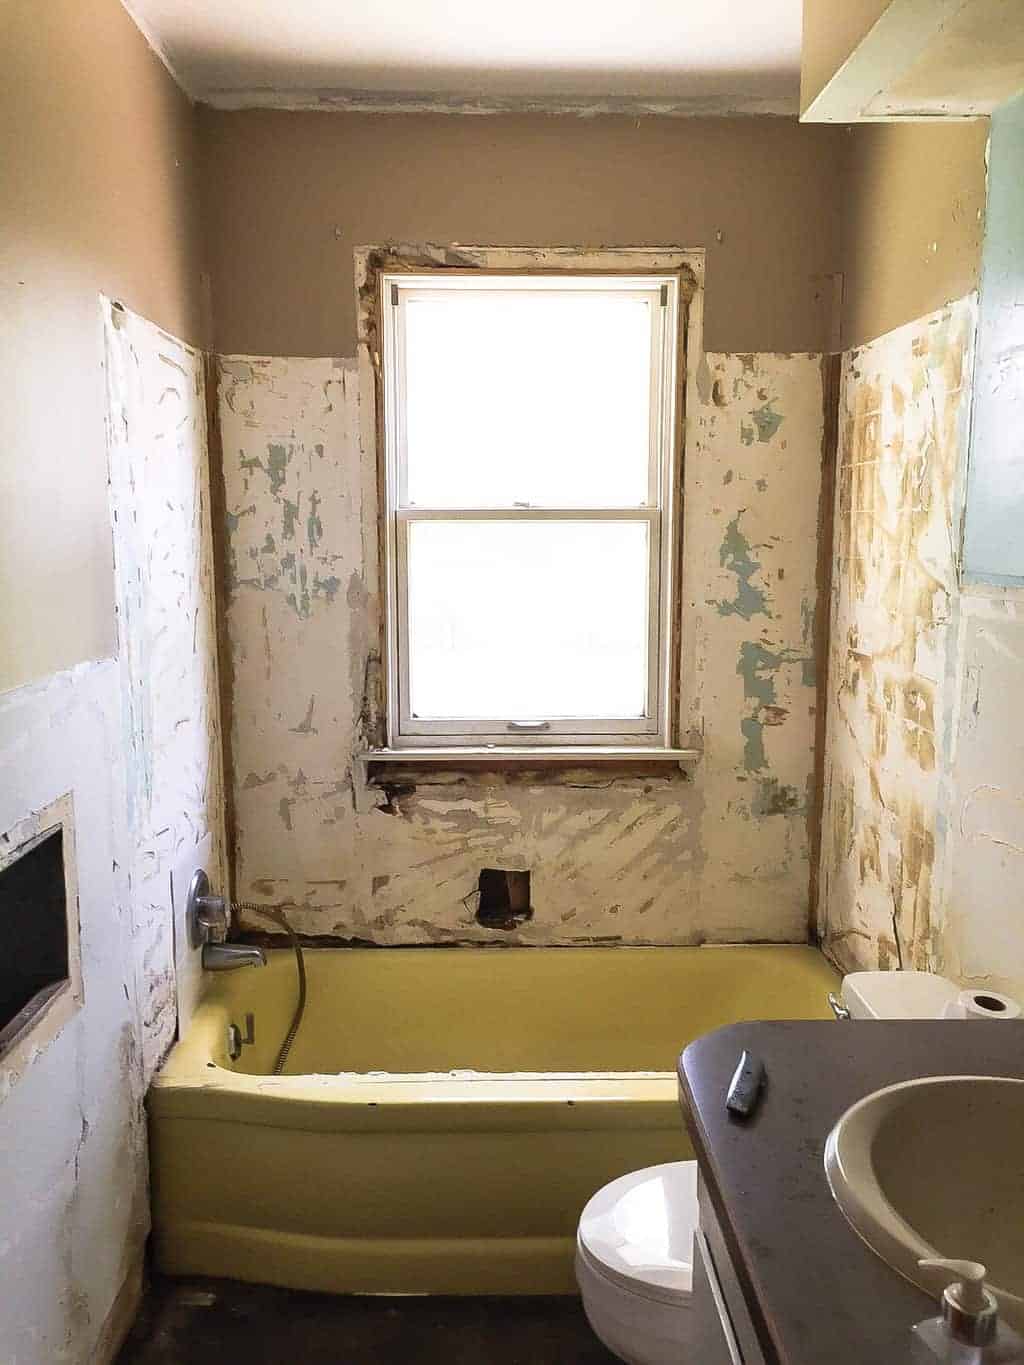 How To Paint A Bathtub Easily, How To Paint A Chipped Bathtub